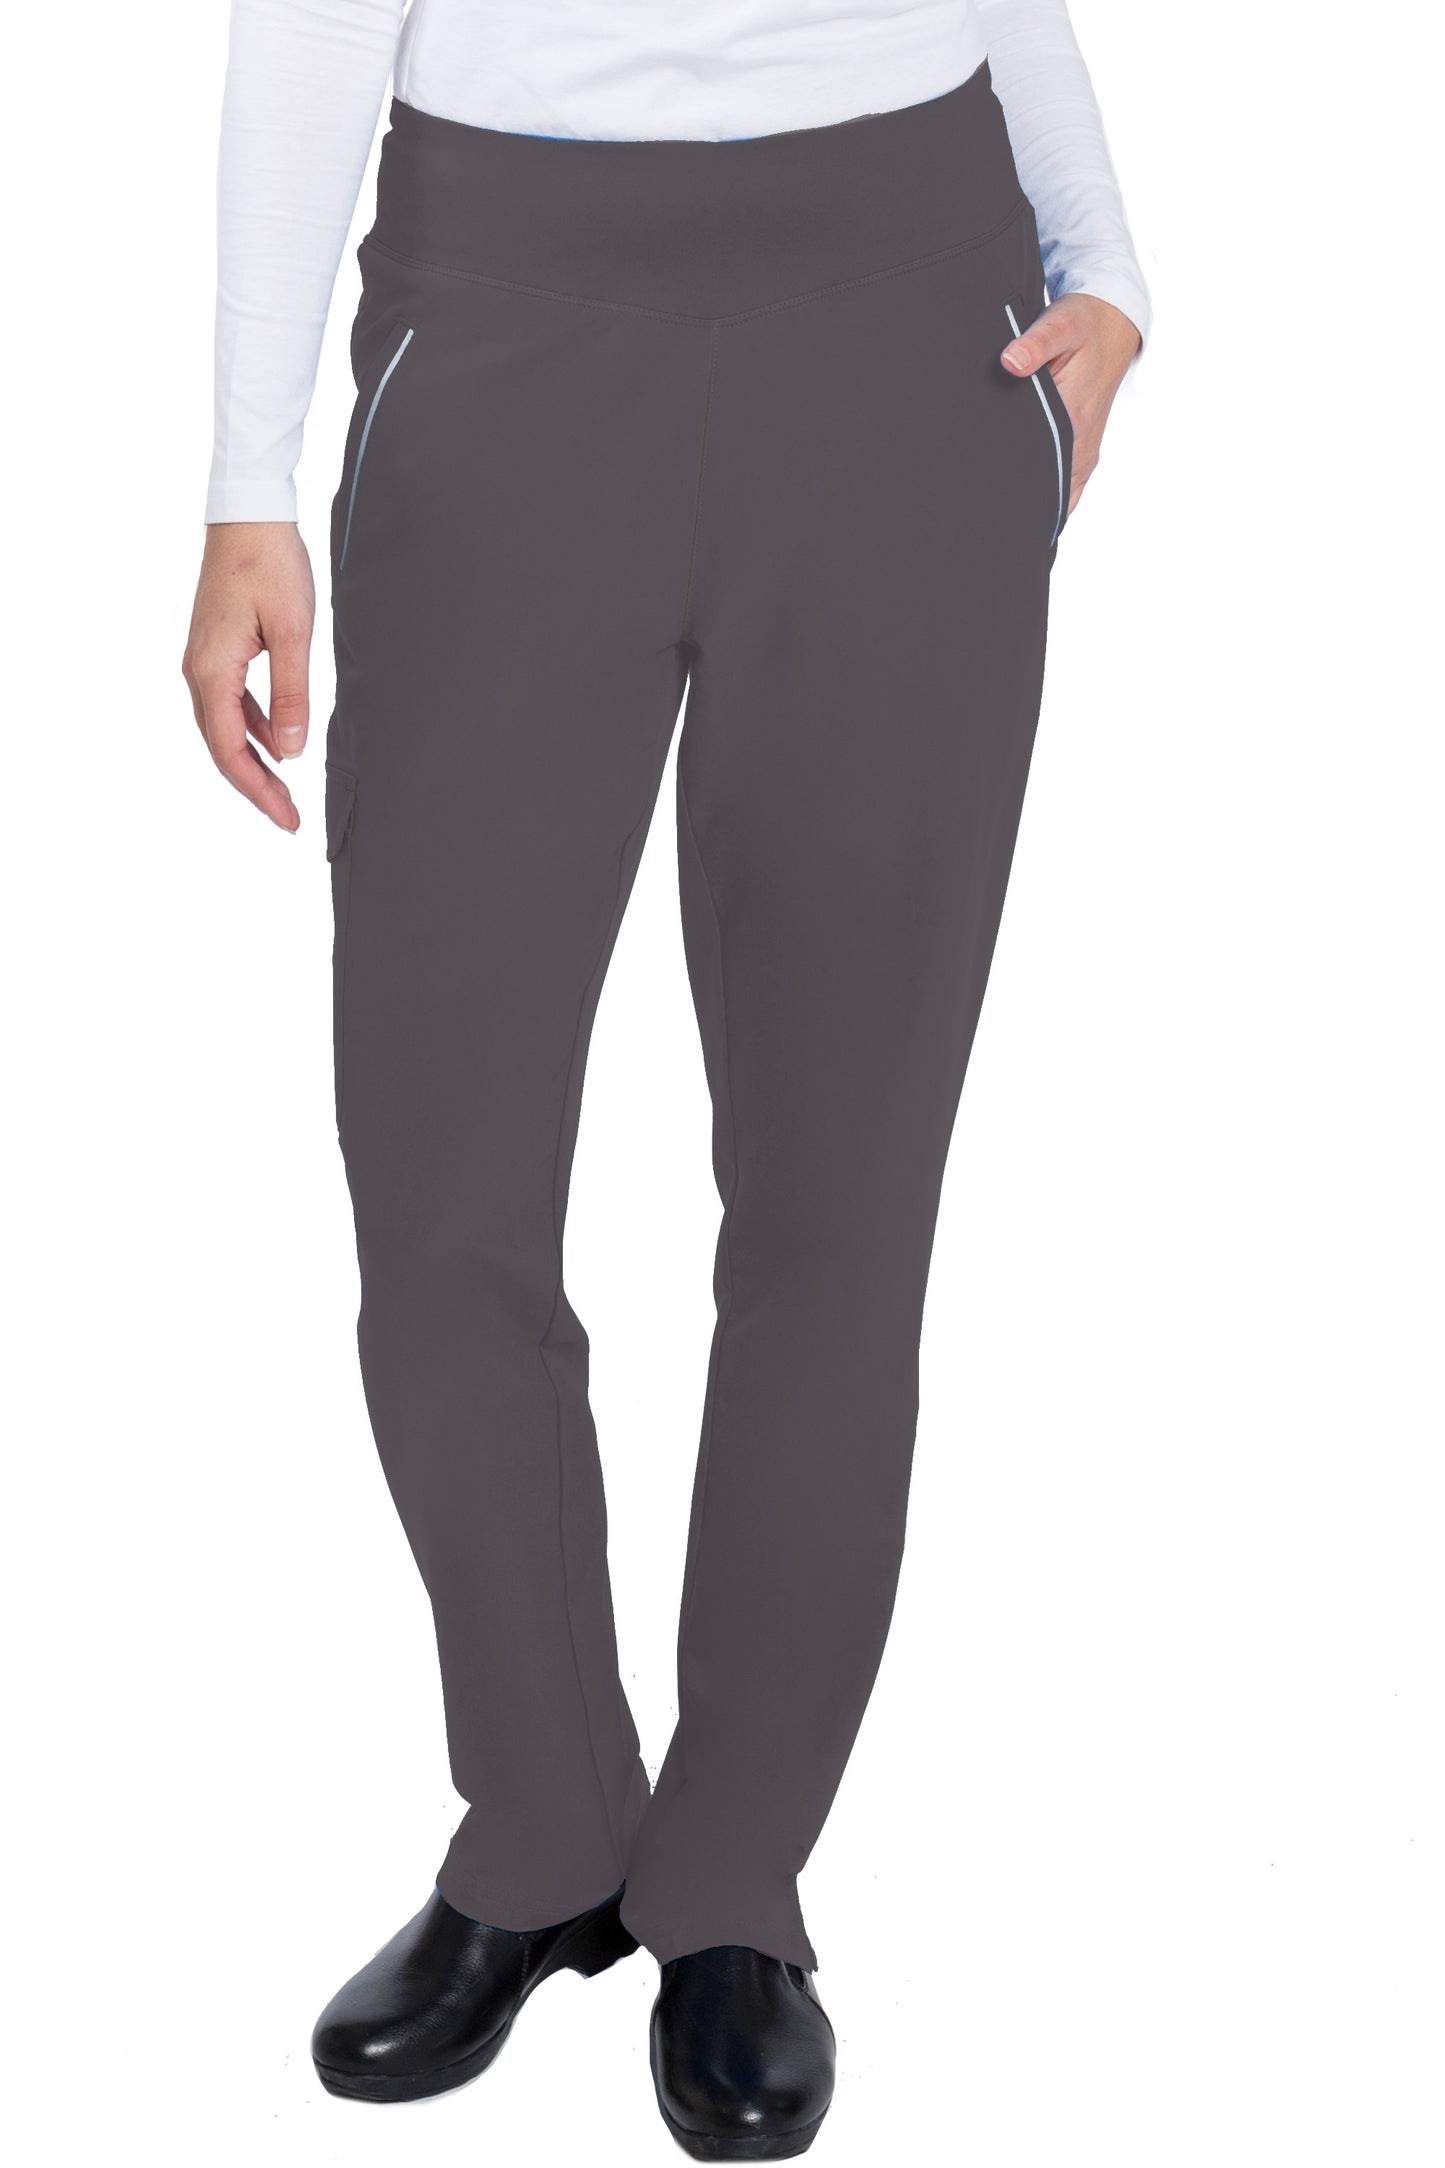 Healing Hands HH360 Naomi Yoga Waist Scrub Pant in Pewter at Parker's Clothing and Shoes.